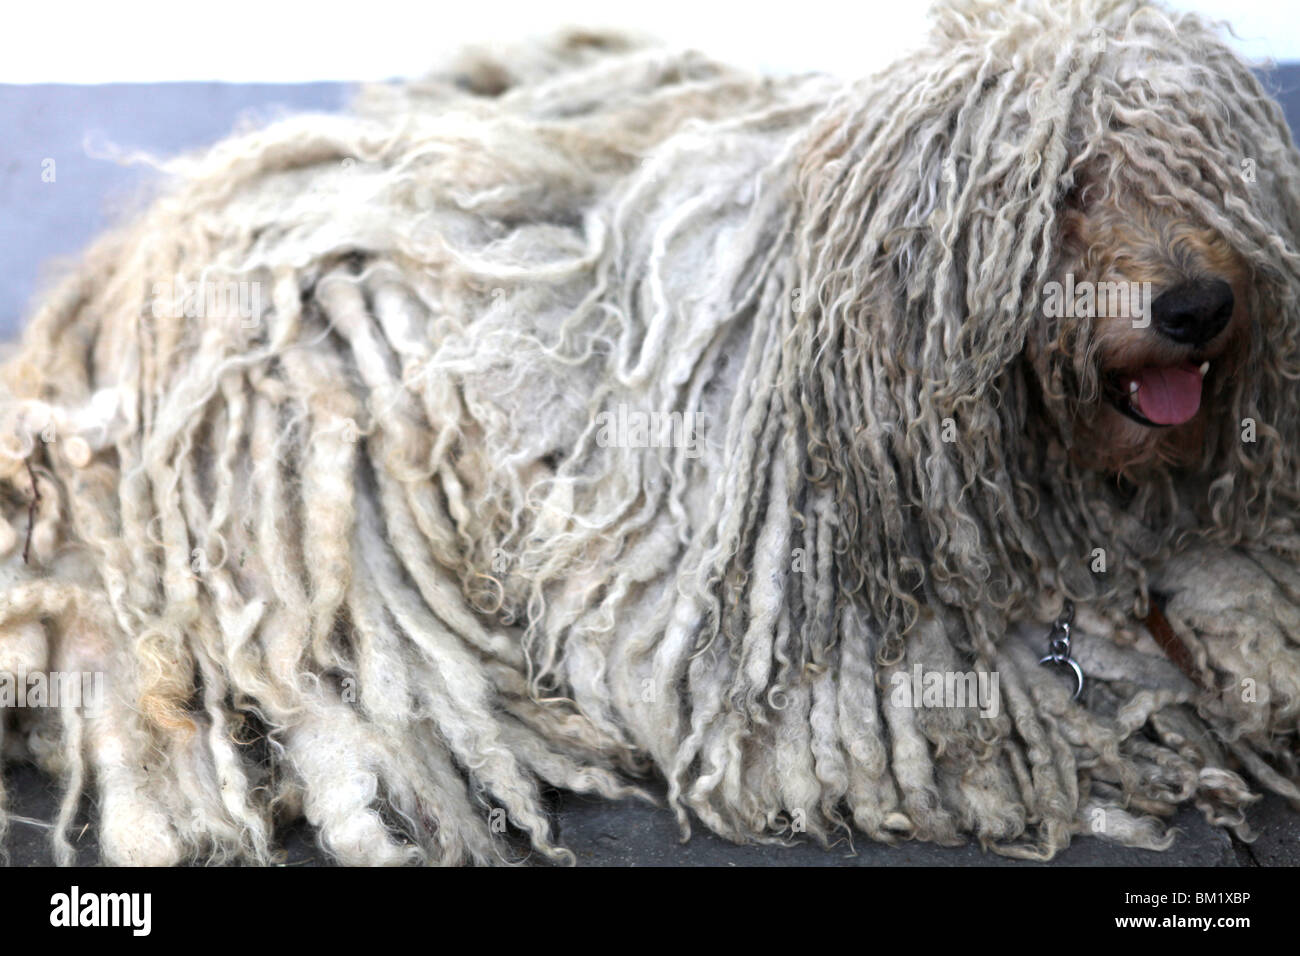 A Puli or Hungarian Water Dog known for its corded coat, similar to dreadlocks in Kecskemét, Hungary, Europe. Stock Photo